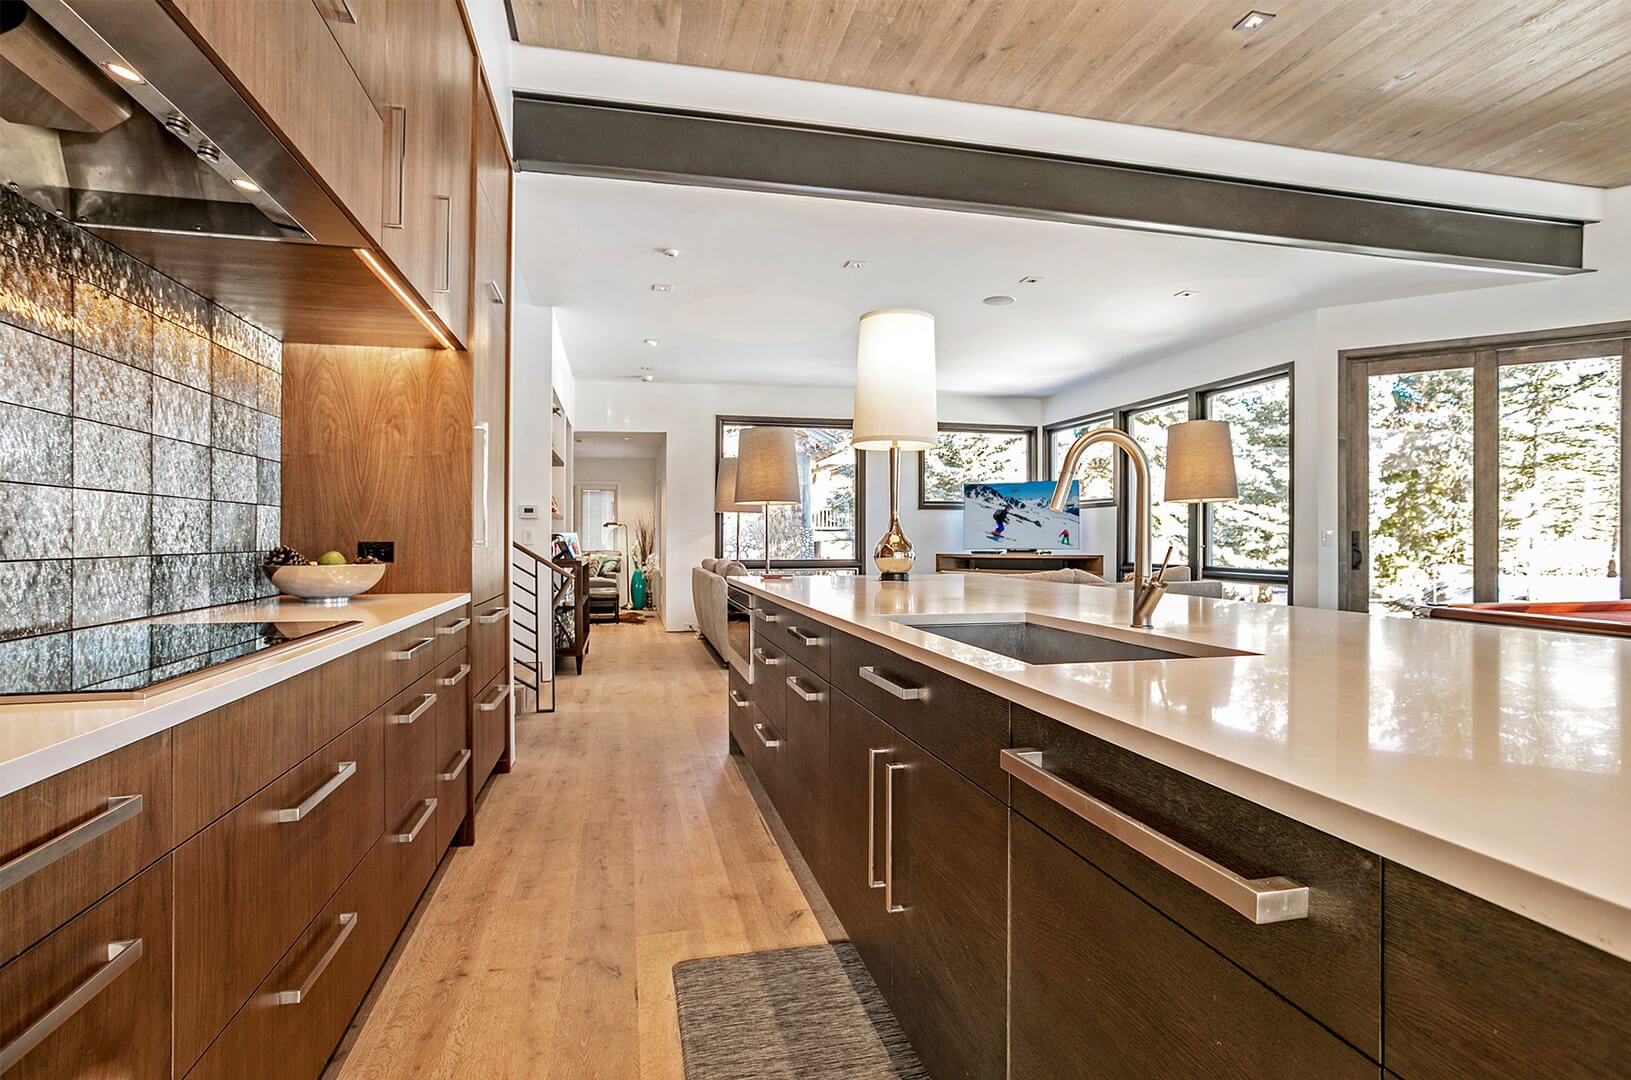 A full shot of a modern kitchen with a kitchen sink, lampshades, a wooden floor, and a wooden cabinet.